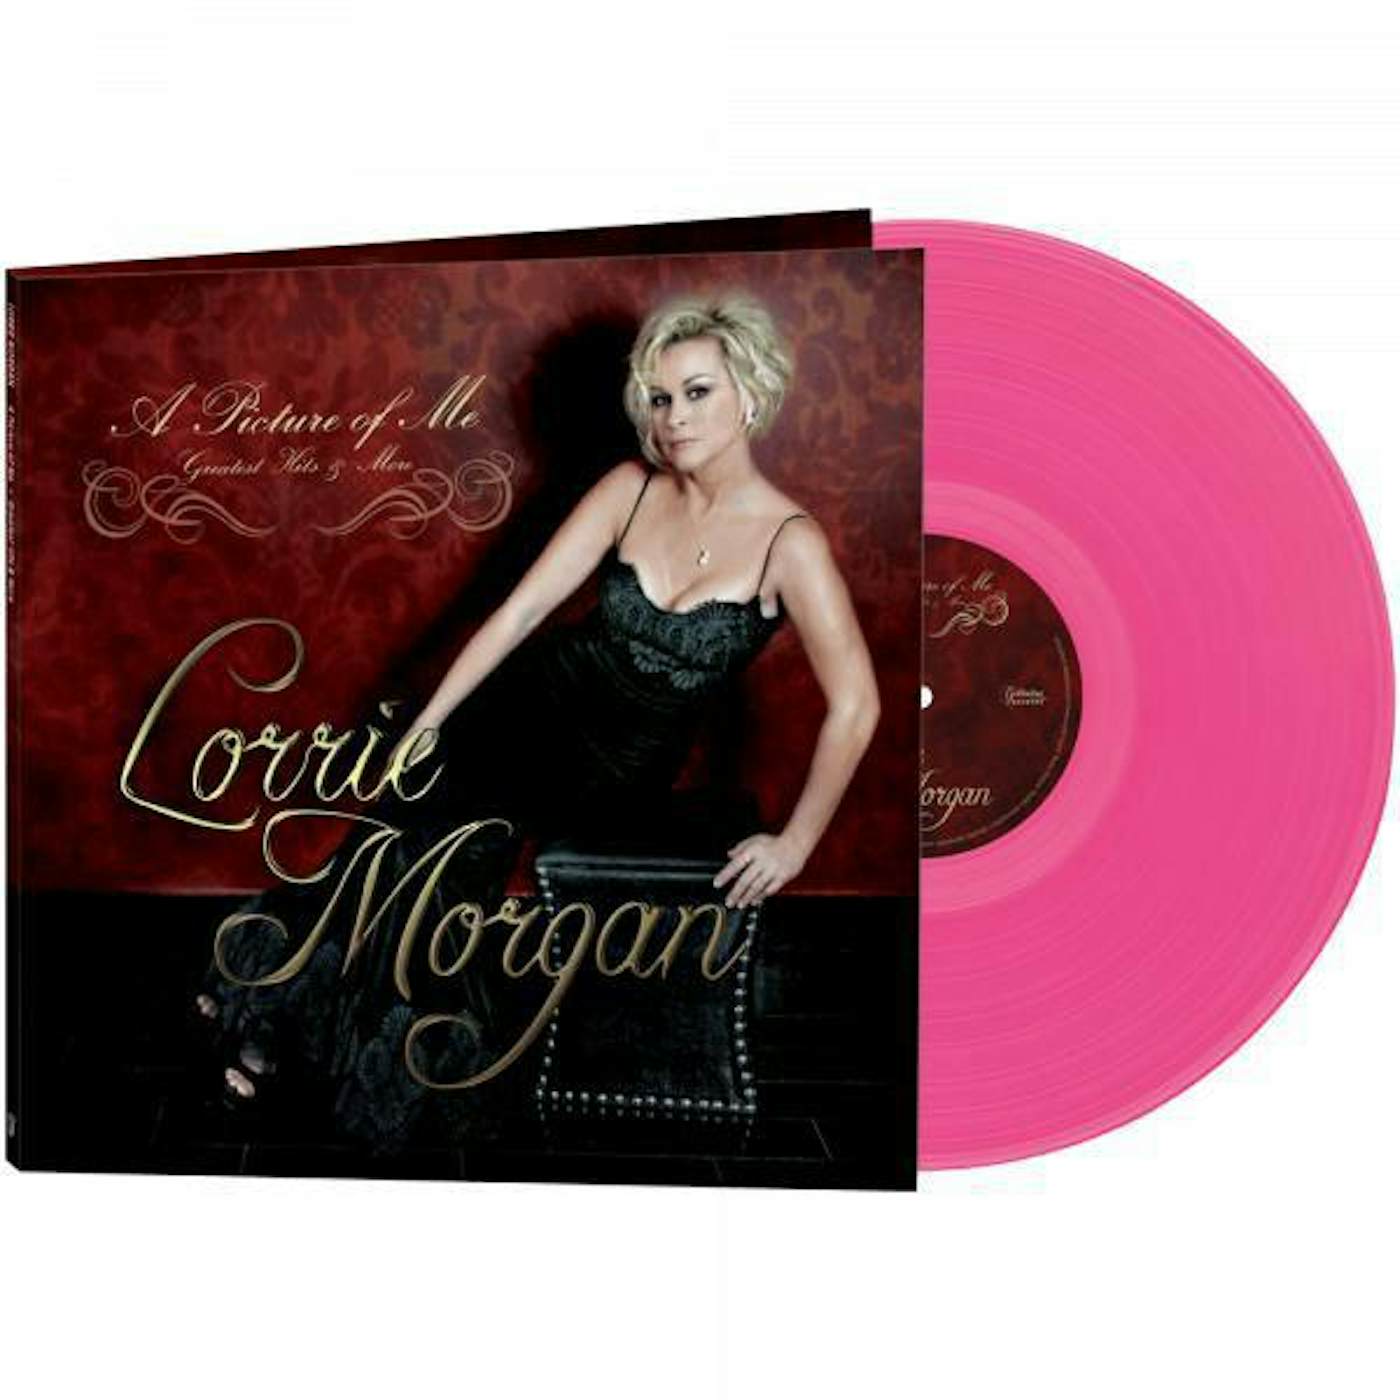 Lorrie Morgan Picture Of Me - Greatest Hits & More (Pink Vinyl Record)